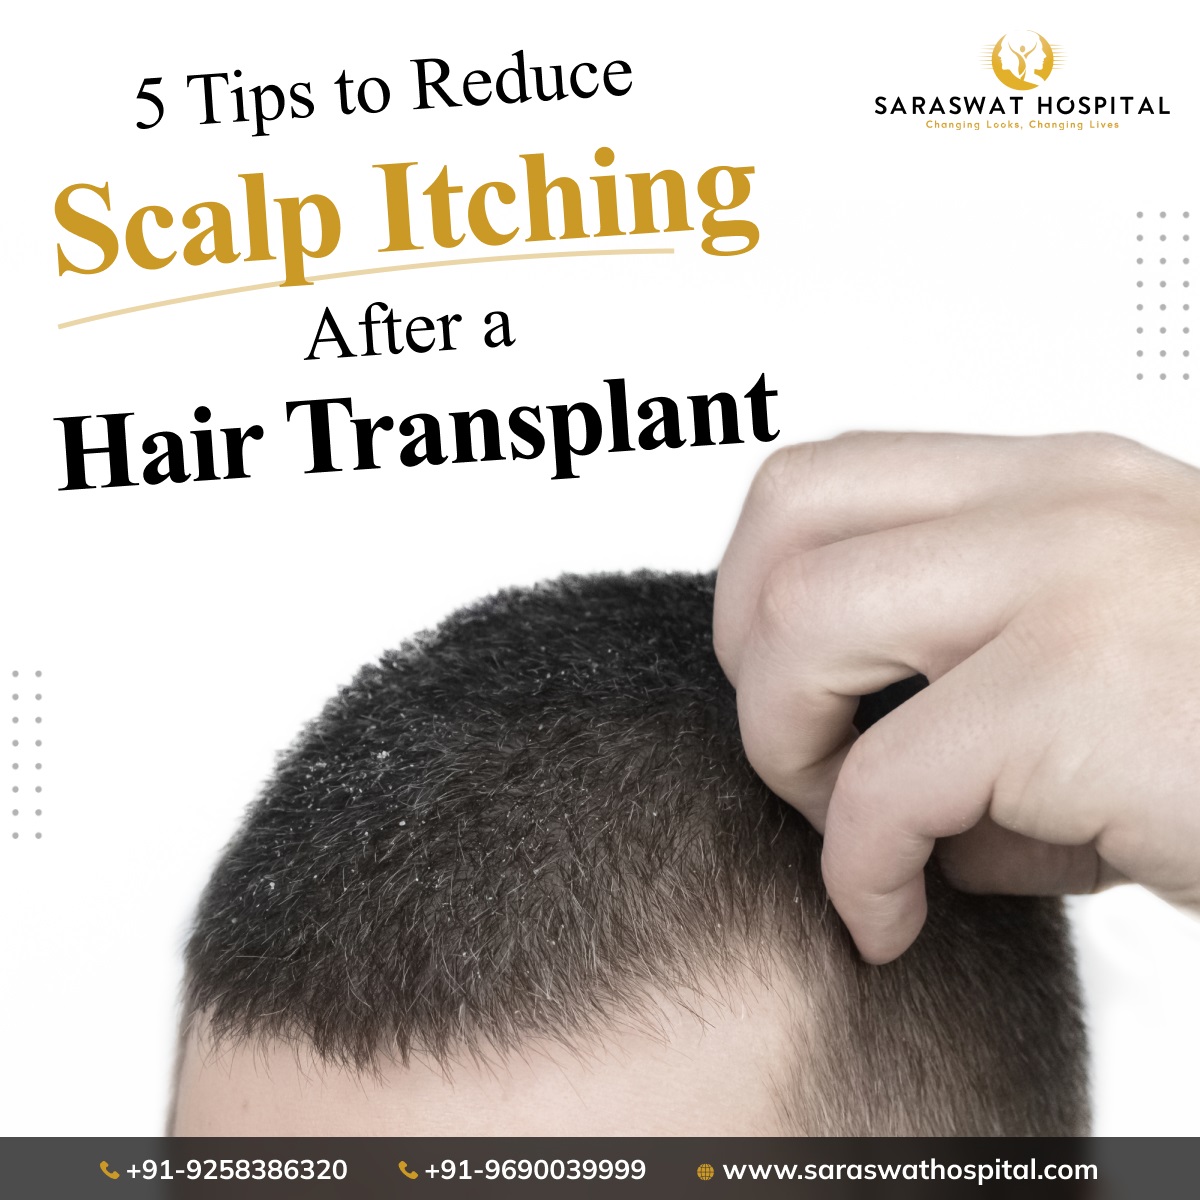 Scalp Itching After a Hair Transplant